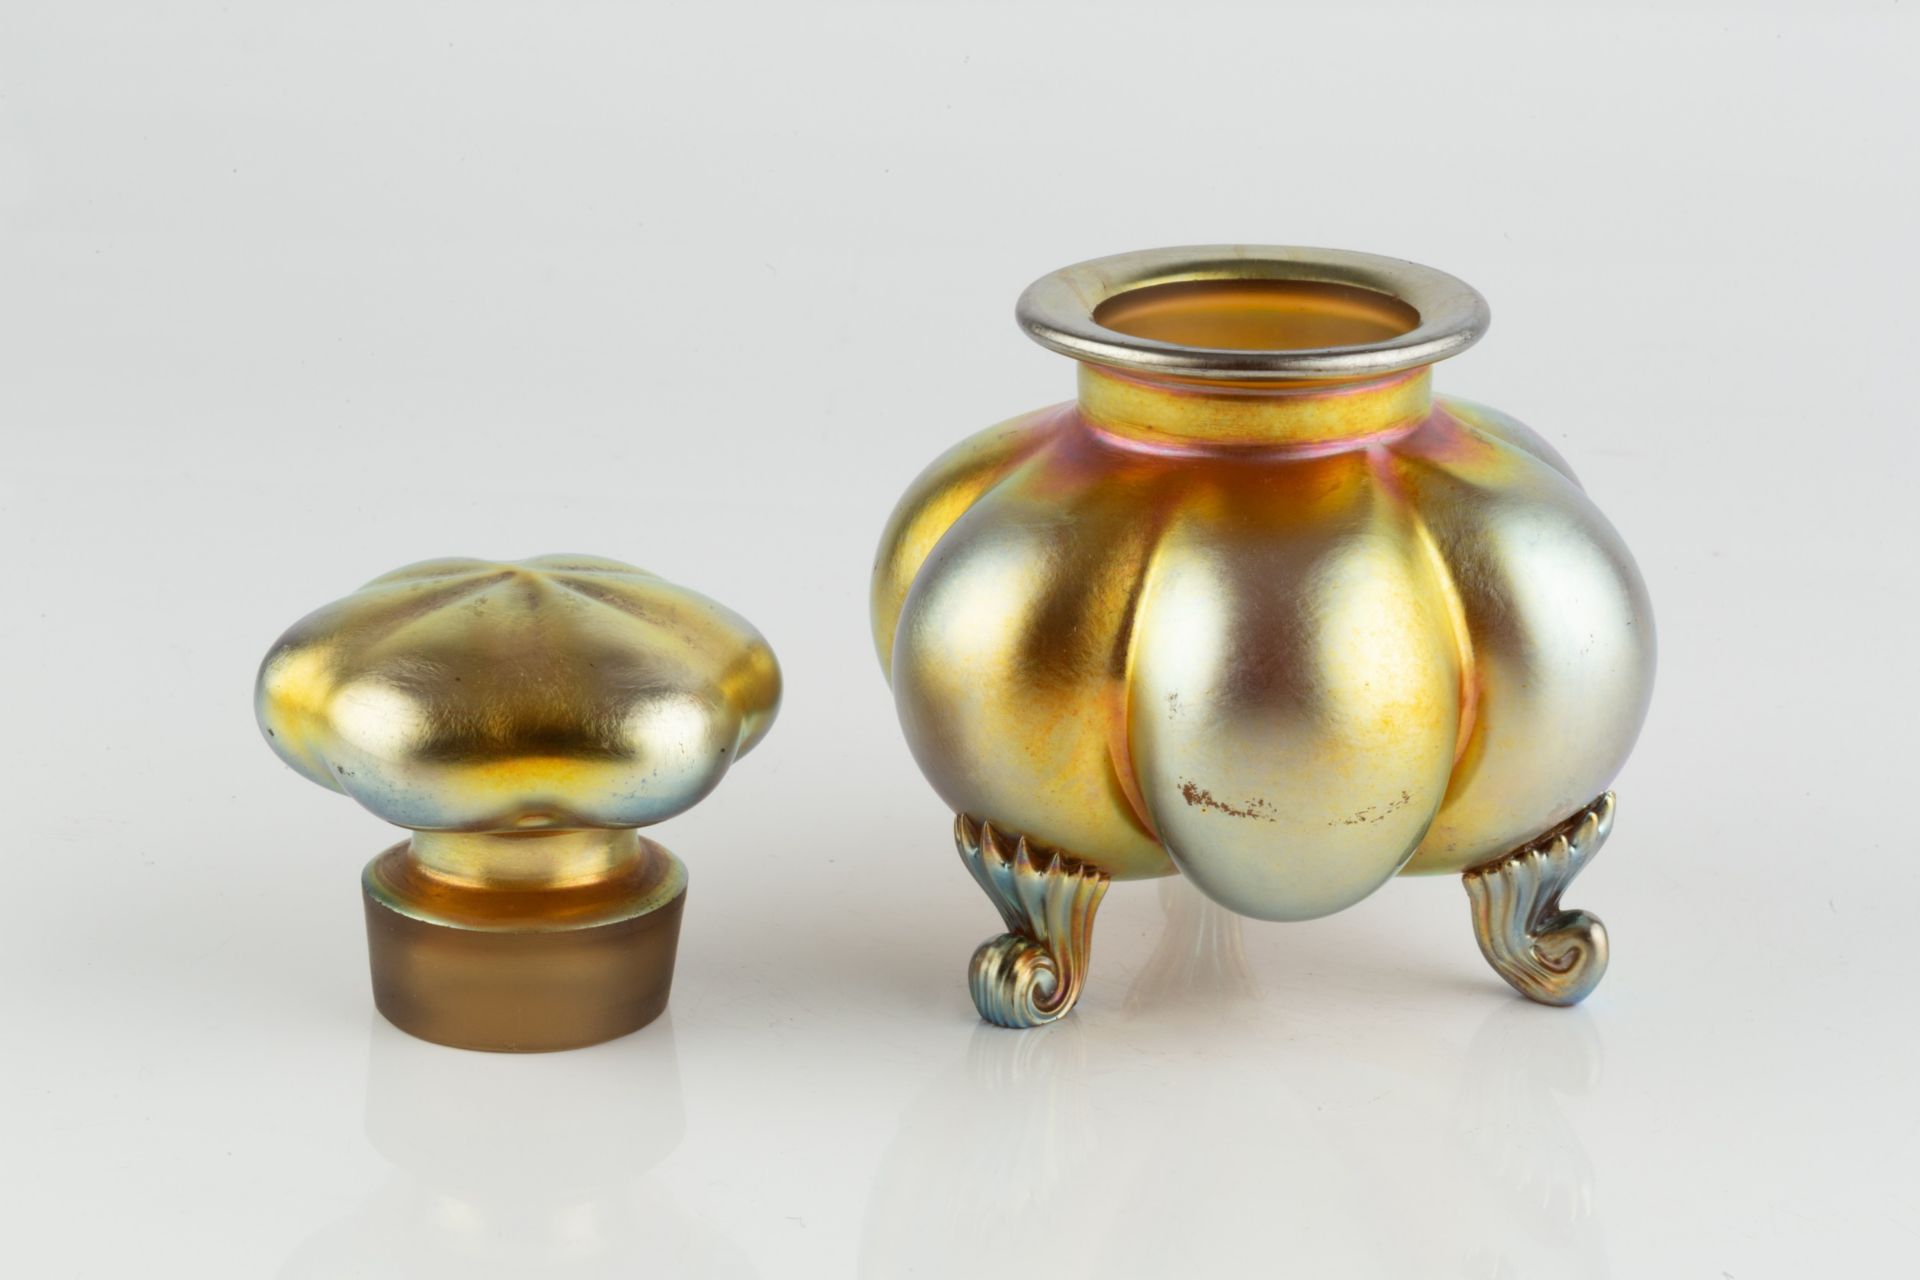 Attributed to Frederick Carder (1863-1963) for Steuben Glass Works Perfume bottle and stopper - Bild 2 aus 3